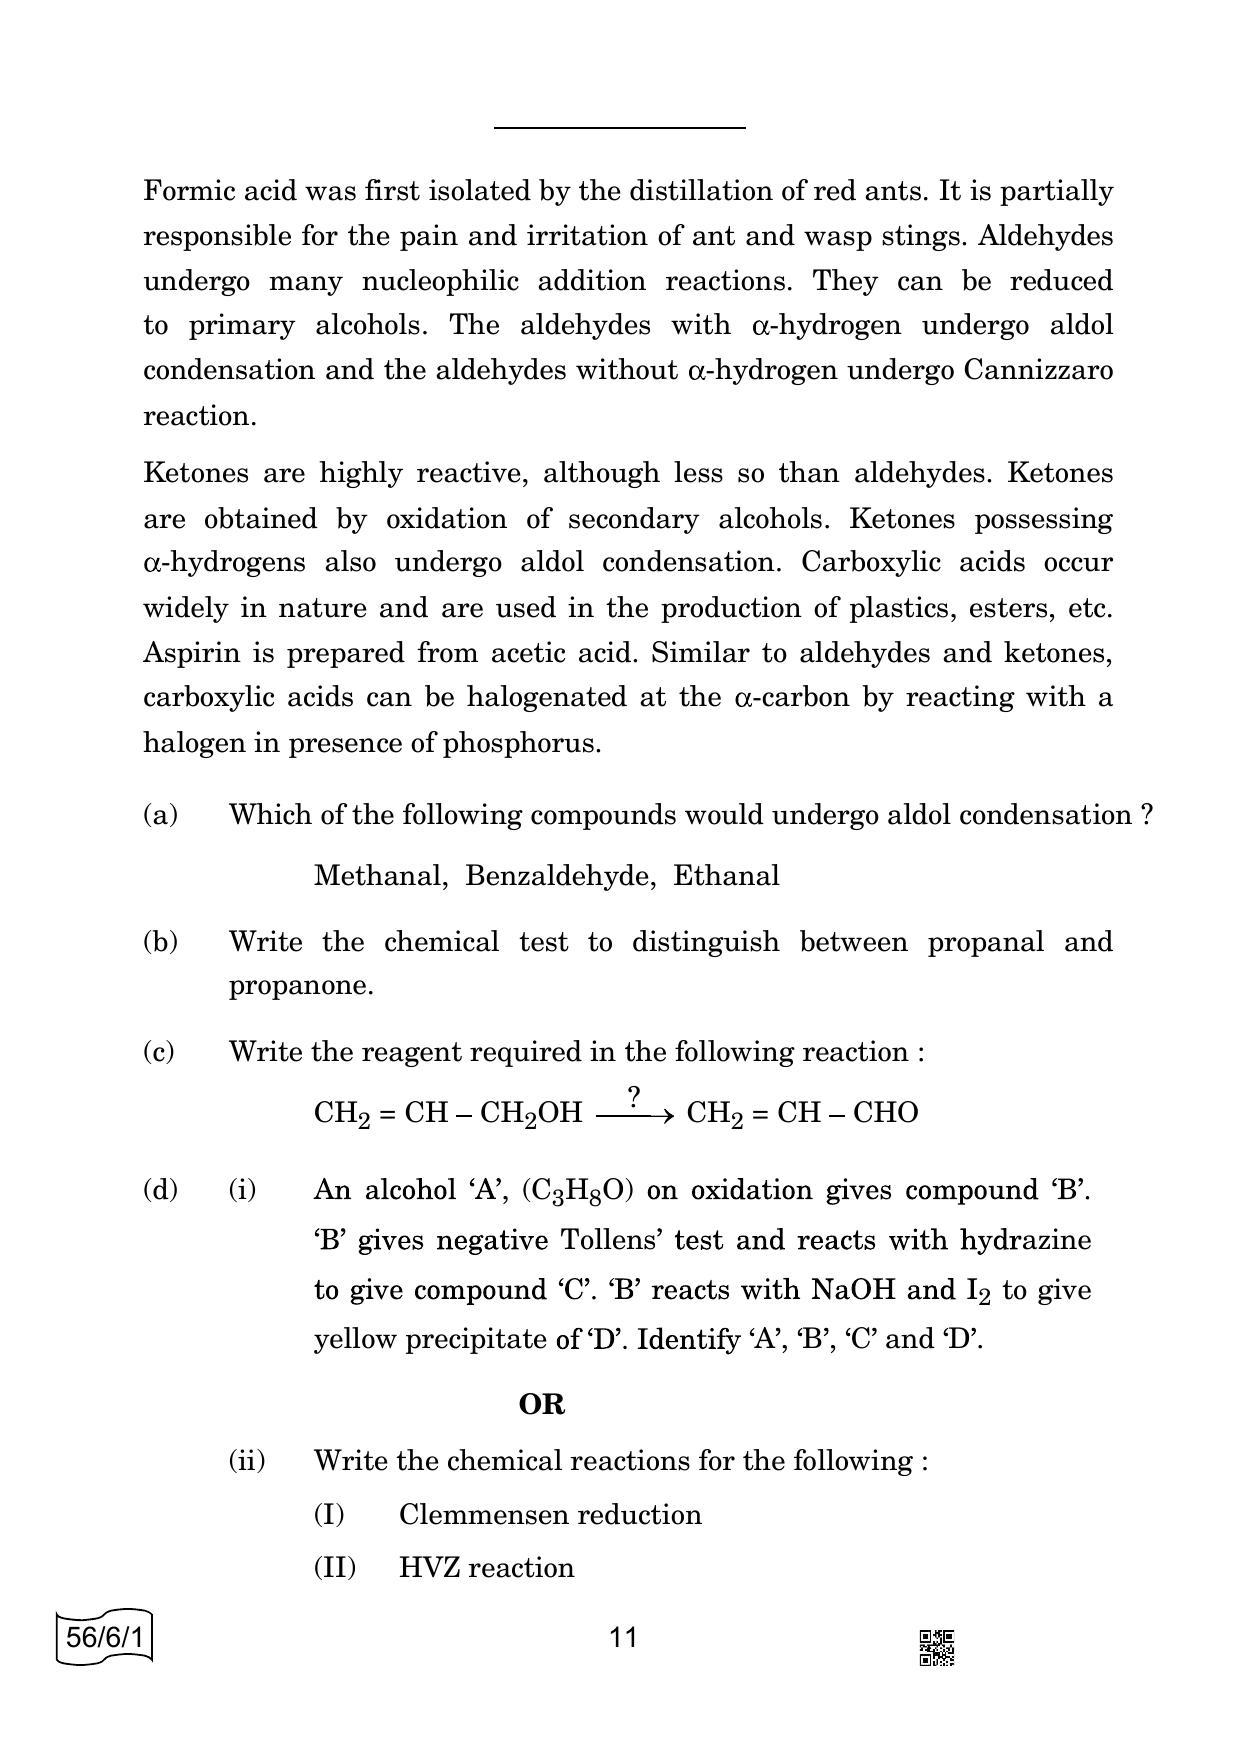 CBSE Class 12 56-6-1 CHEMISTRY 2022 Compartment Question Paper - Page 11